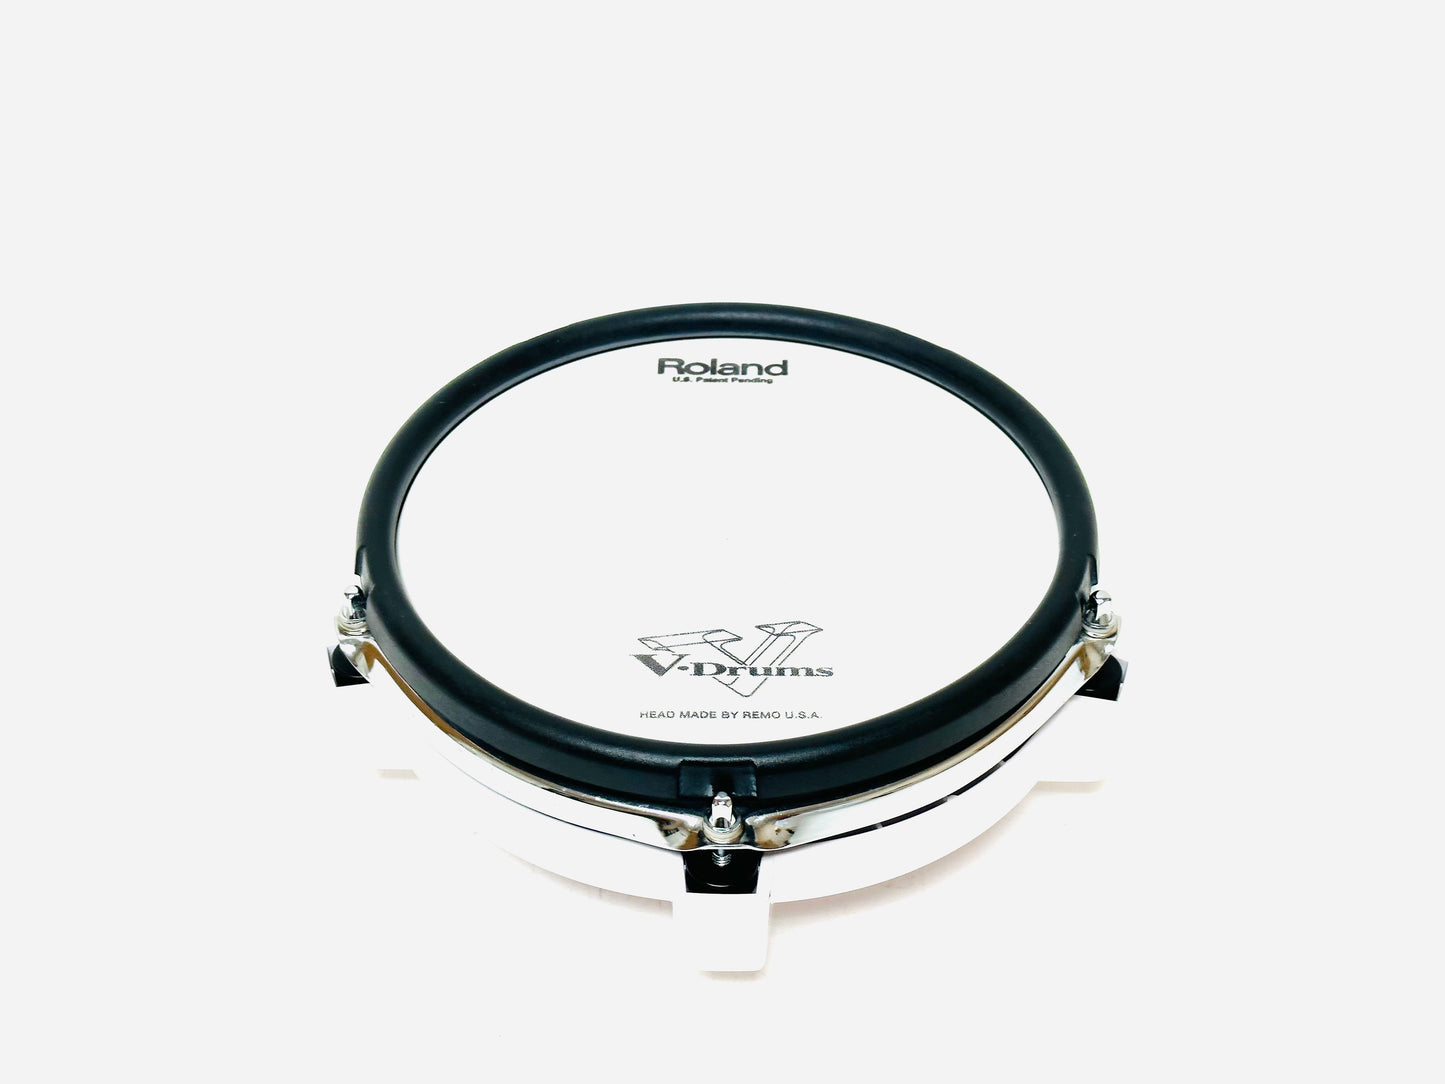 Roland PD-85 White Mesh 8” Tom or Snare Pad PD85